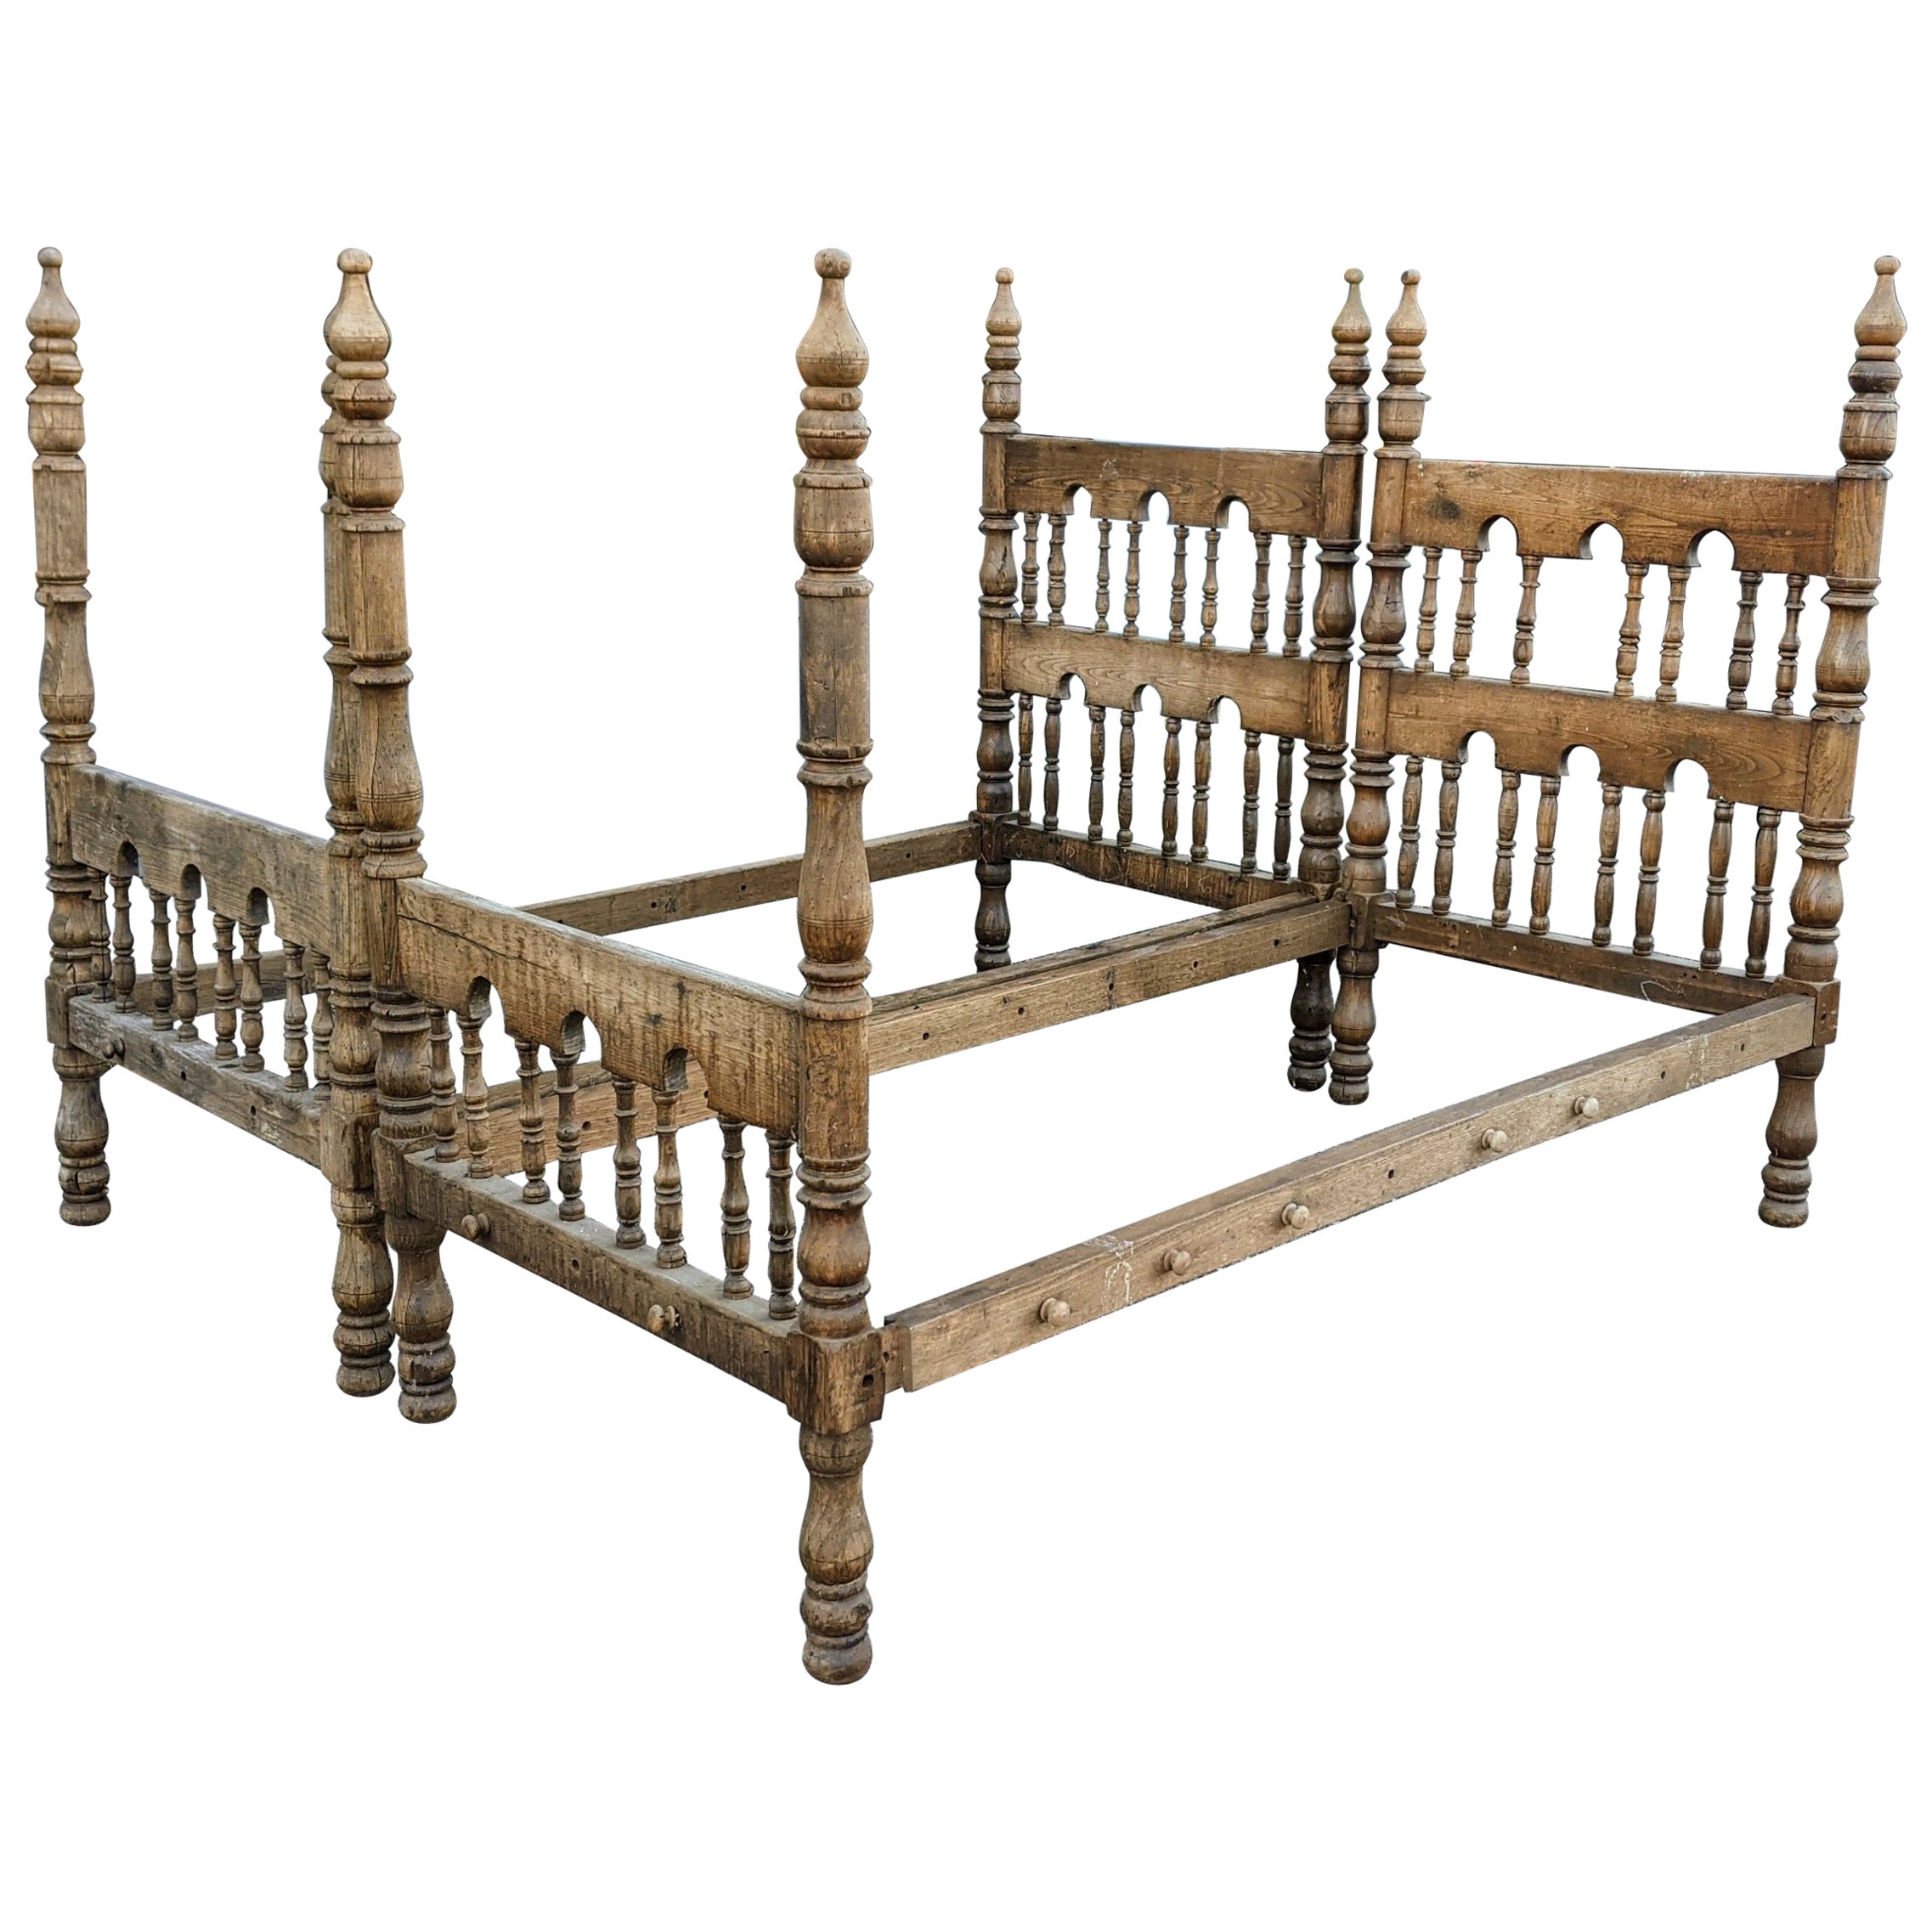 Pair of Rustic Twin Beds in Turned Chestnut Wood, Early 1900s For Sale